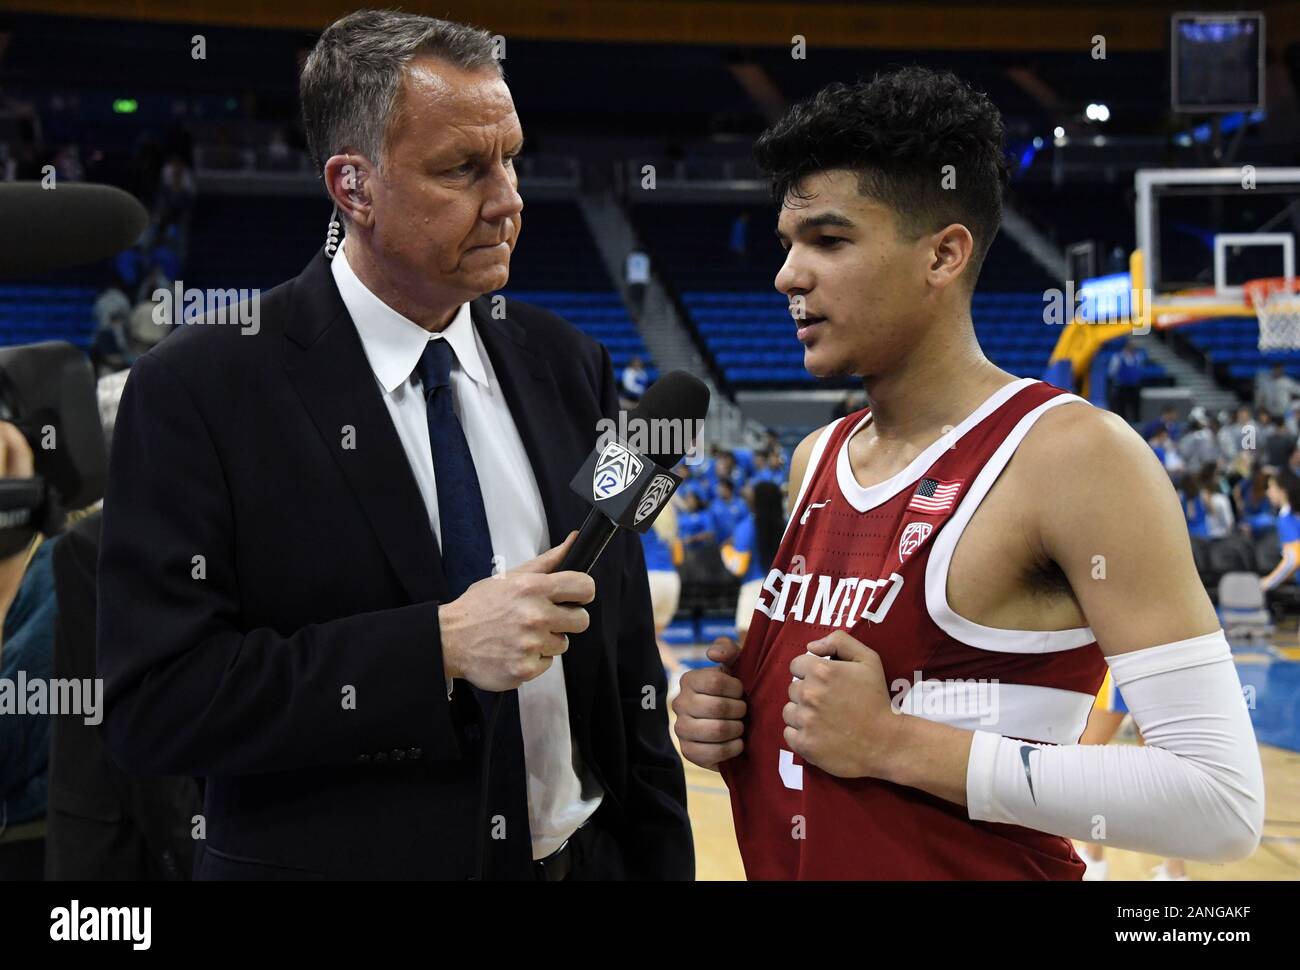 Jan 15, 2020; Los Angeles, California, USA; Stanford Cardinal guard Tyrell Terry (3) is interviewed by Pac-12 Networks broadcaster Dan MacLean after the game against the UCLA Bruins at Pauley Pavilion. Stanford defeated UCLA 74-59. (Photo by IOS/ESPA-Images) Stock Photo